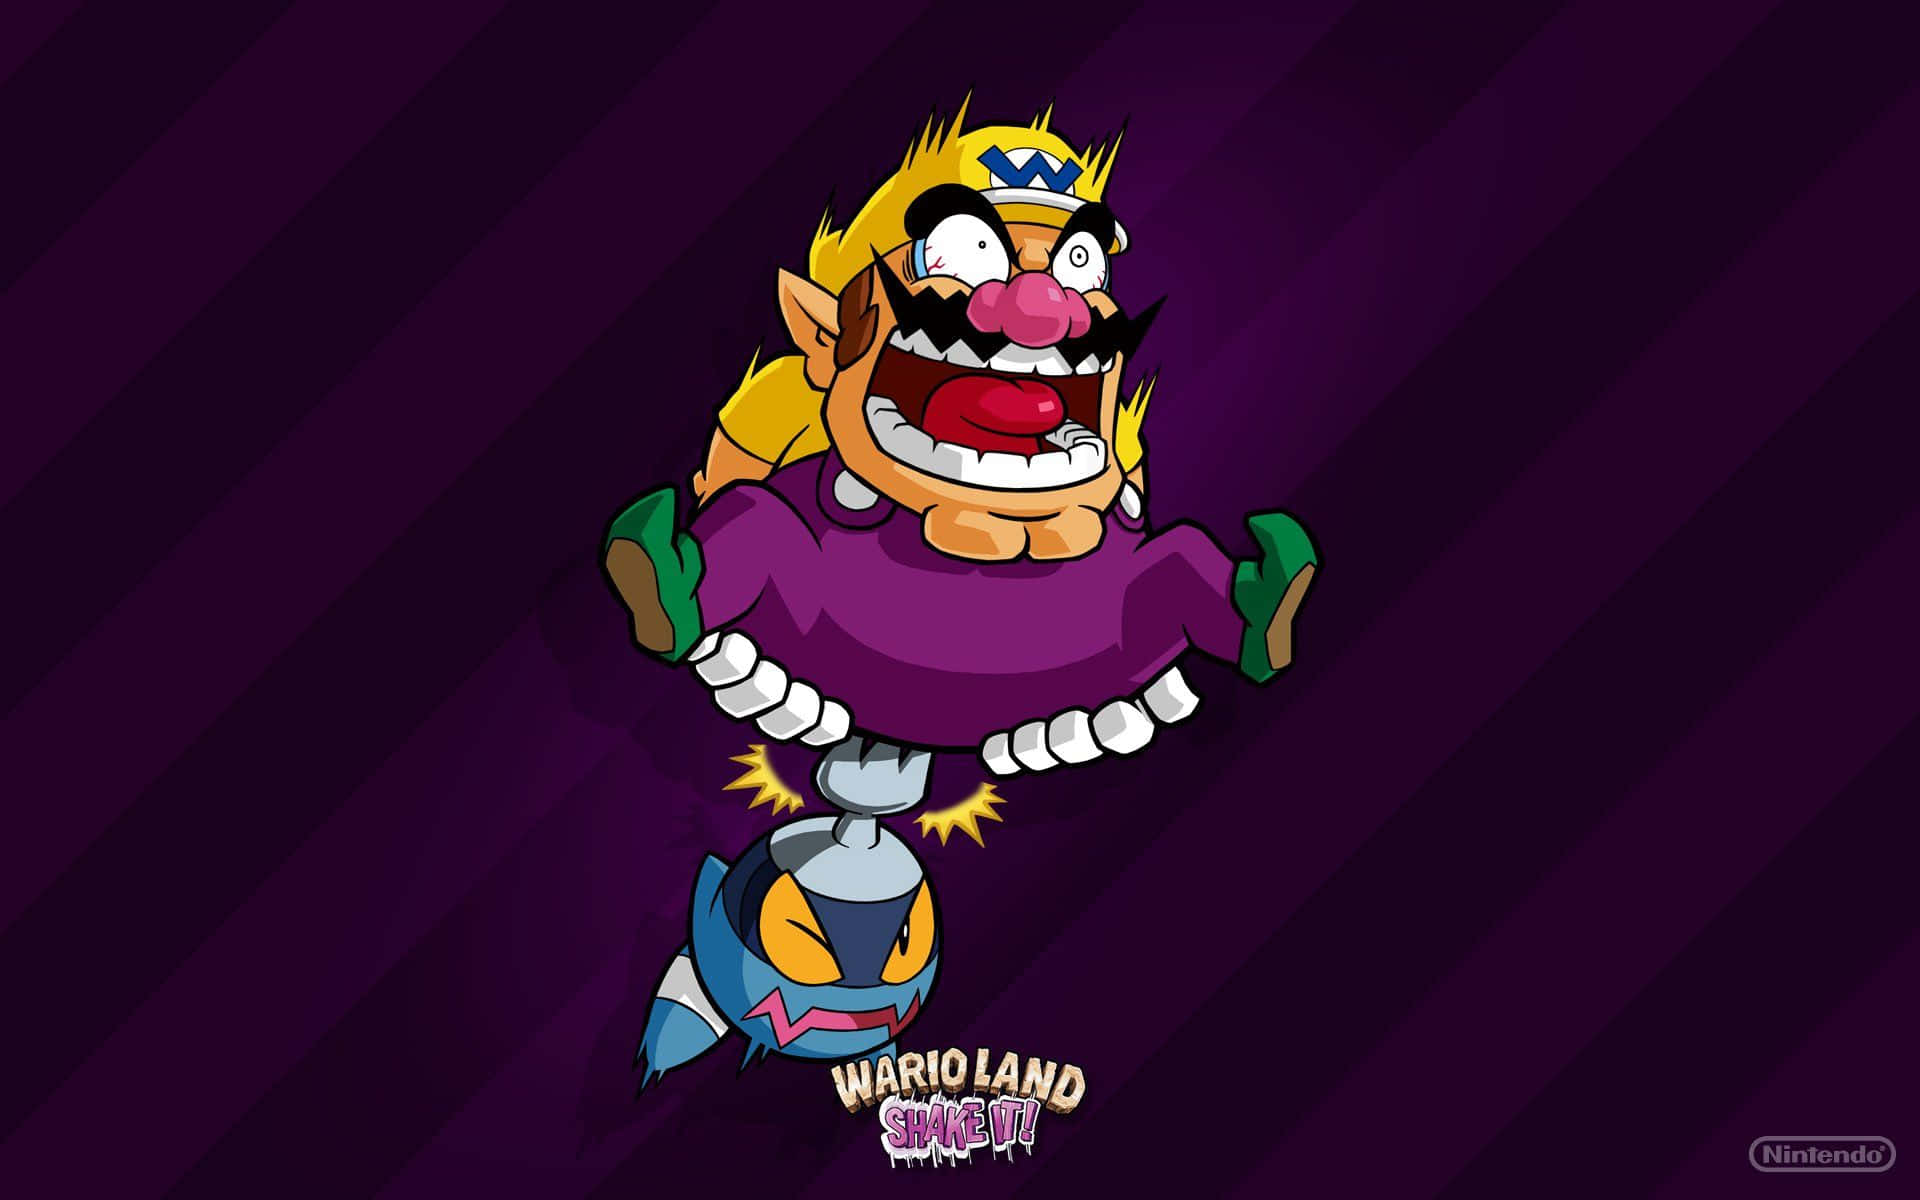 Wario, The Mischievous Antagonist, Taking Center Stage In This Vibrant Artwork